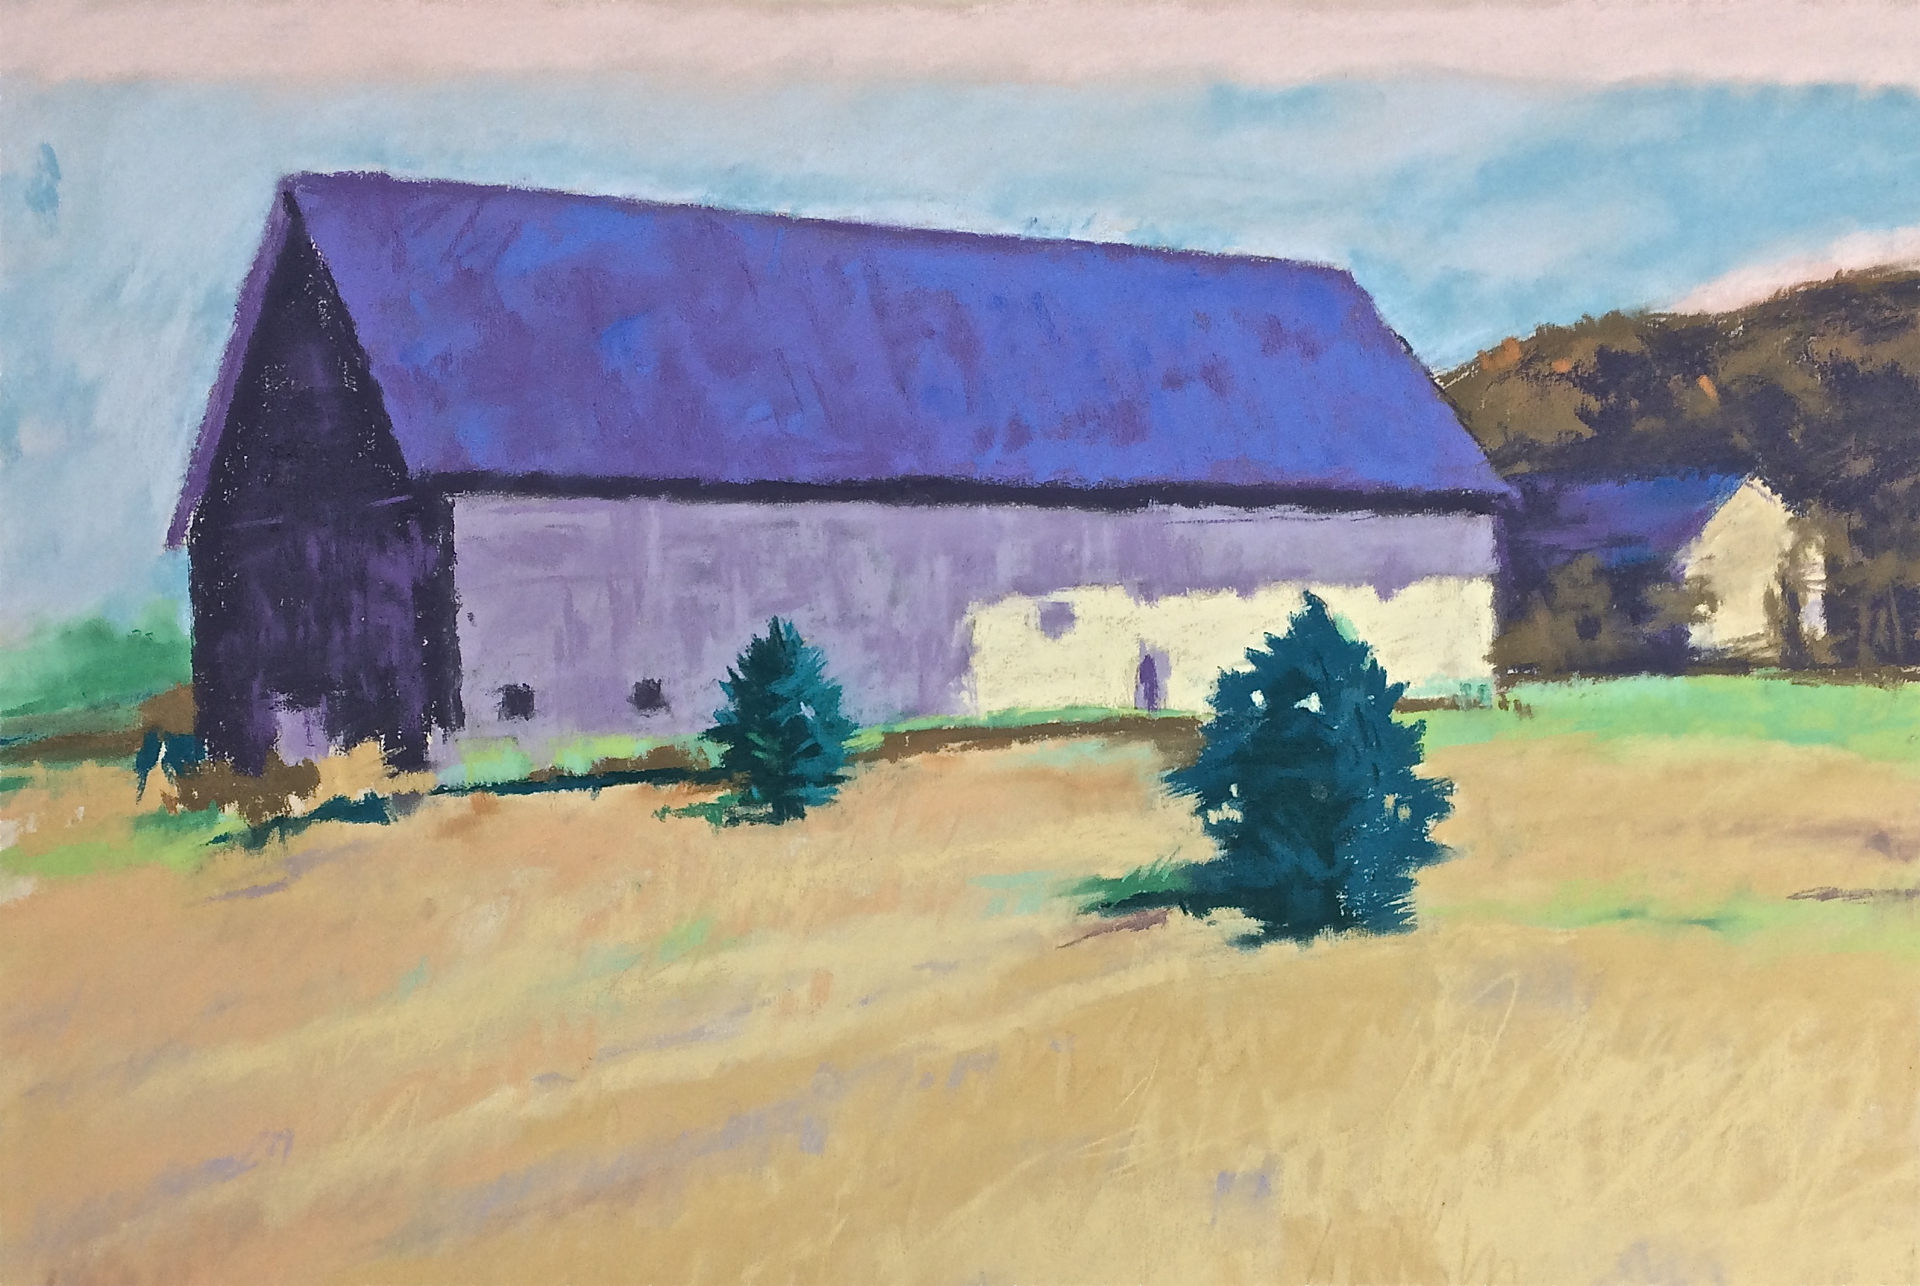 Purple Roofed Barn  by Mike Kelly